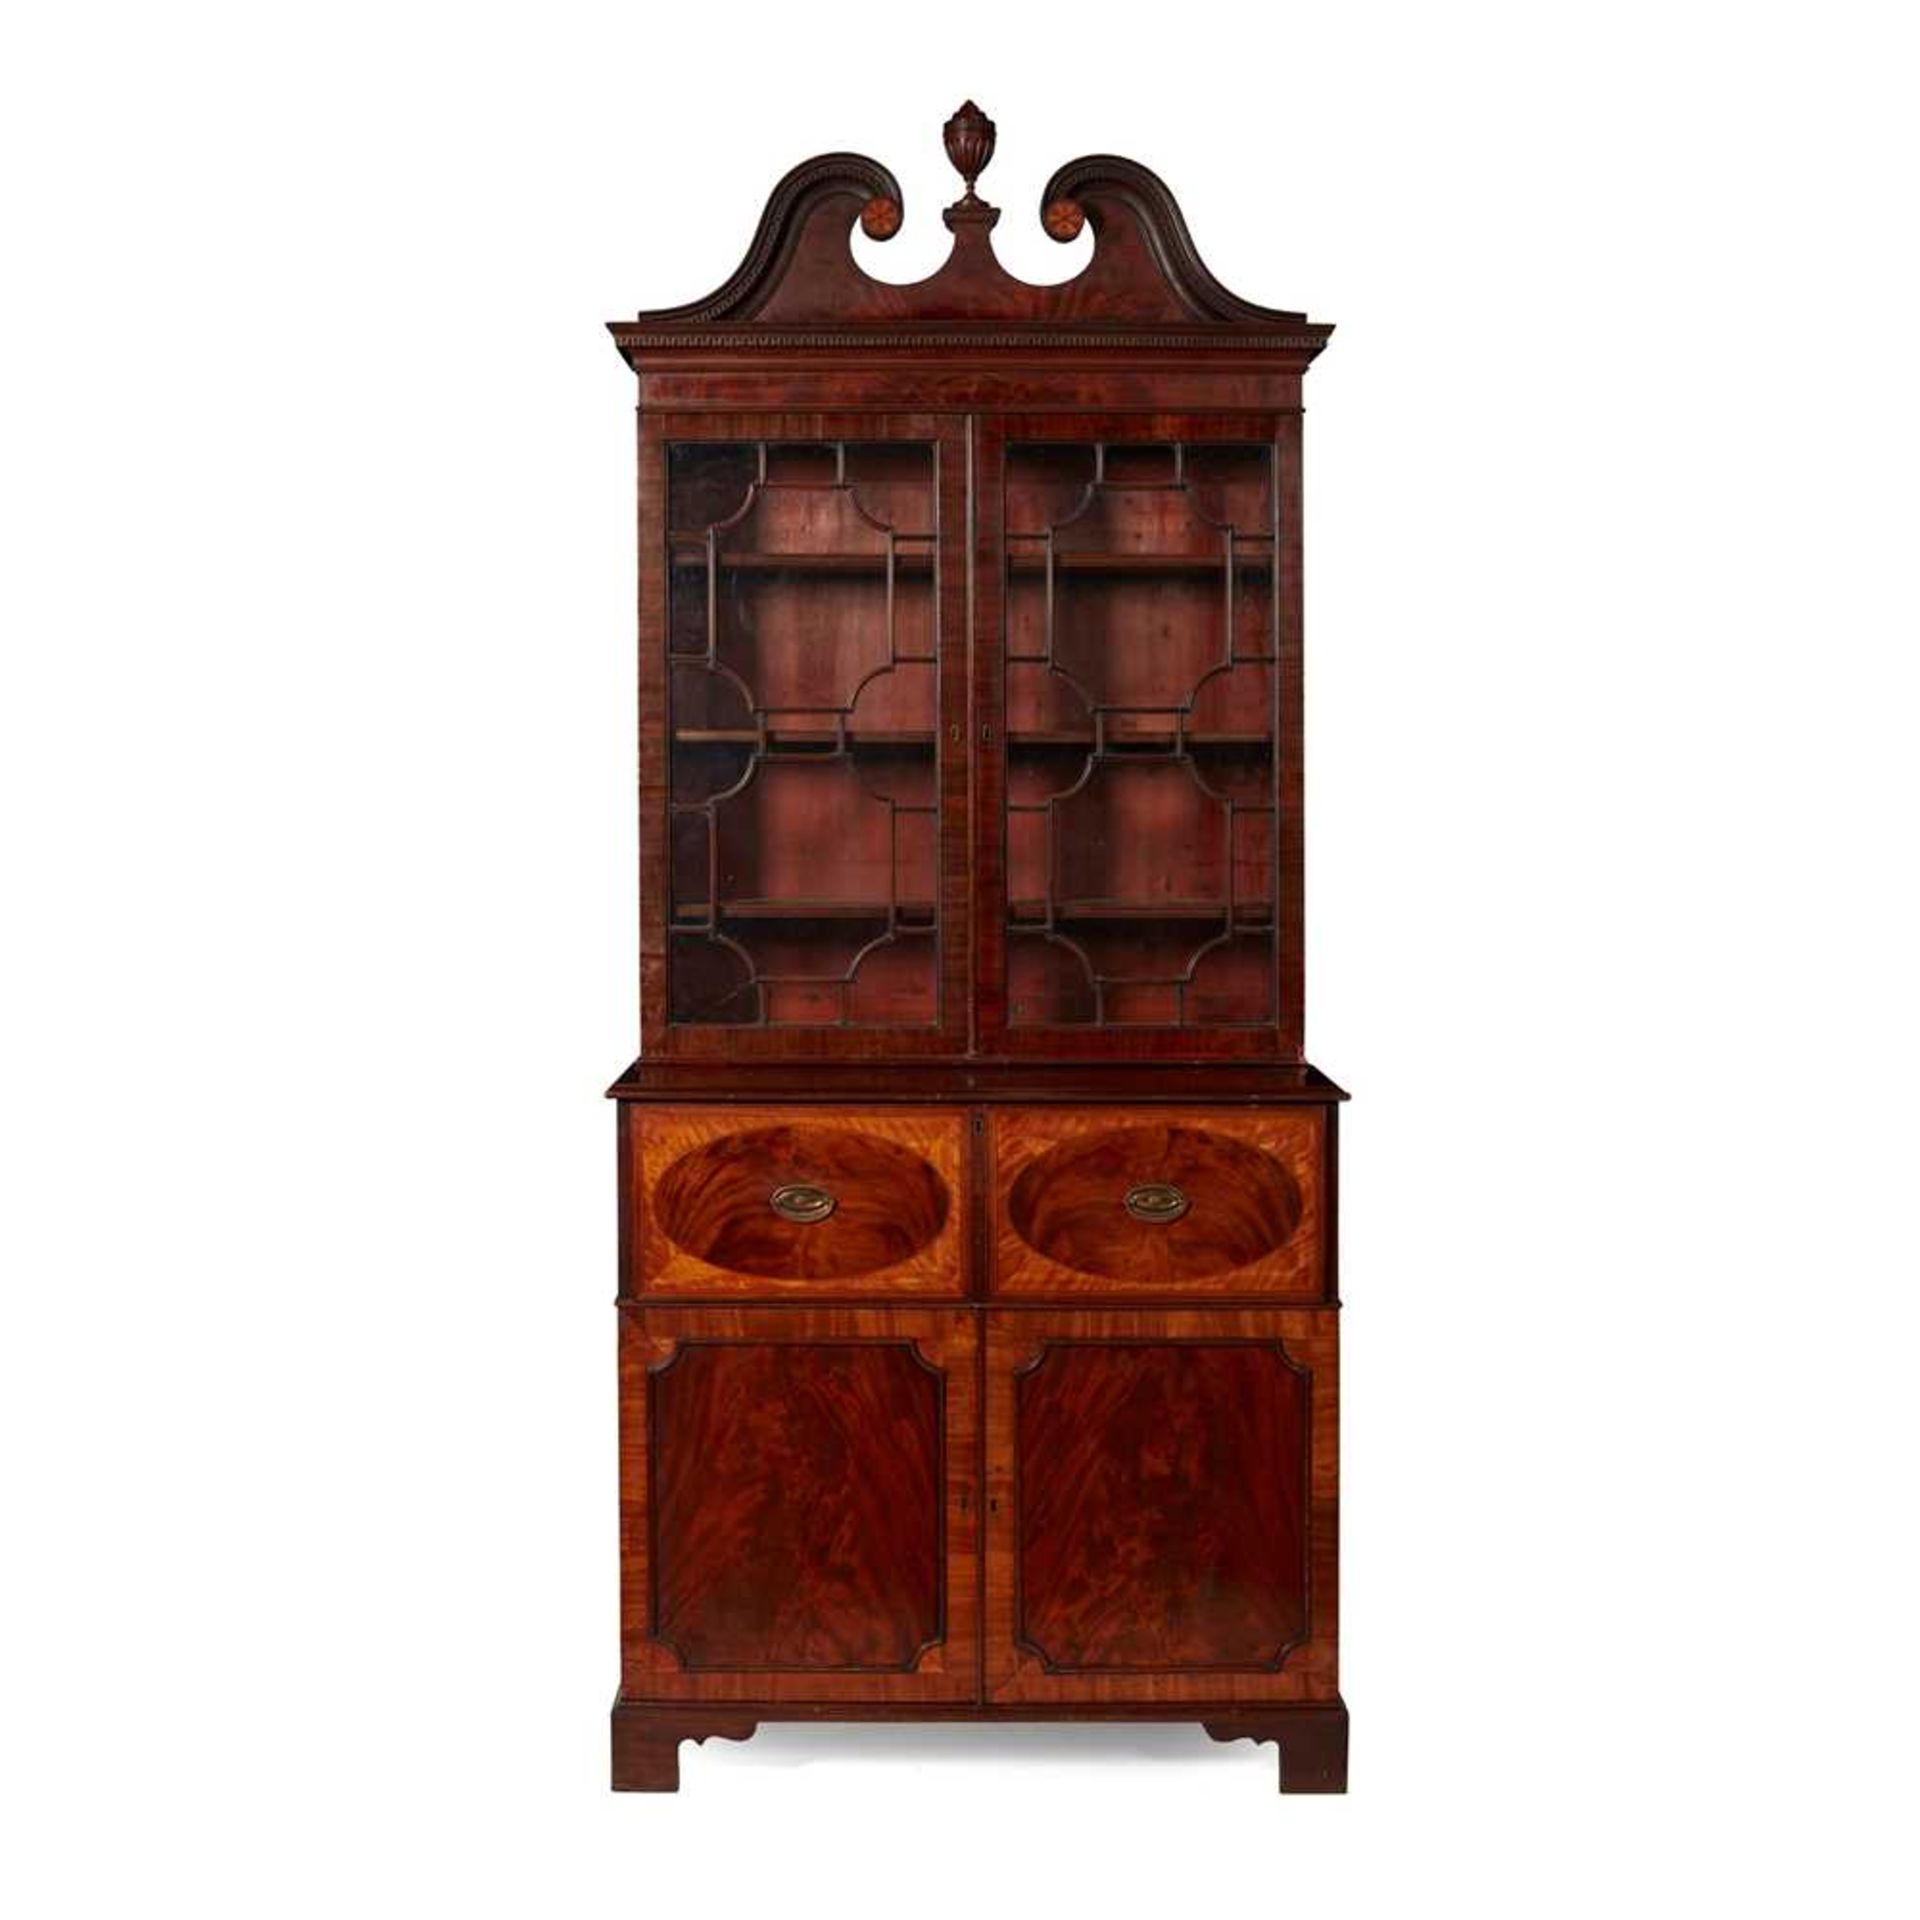 GEORGE III MAHOGANY SECRETAIRE BOOKCASE CABINET LATE 19TH CENTURY, THE TOP ASSOCIATED